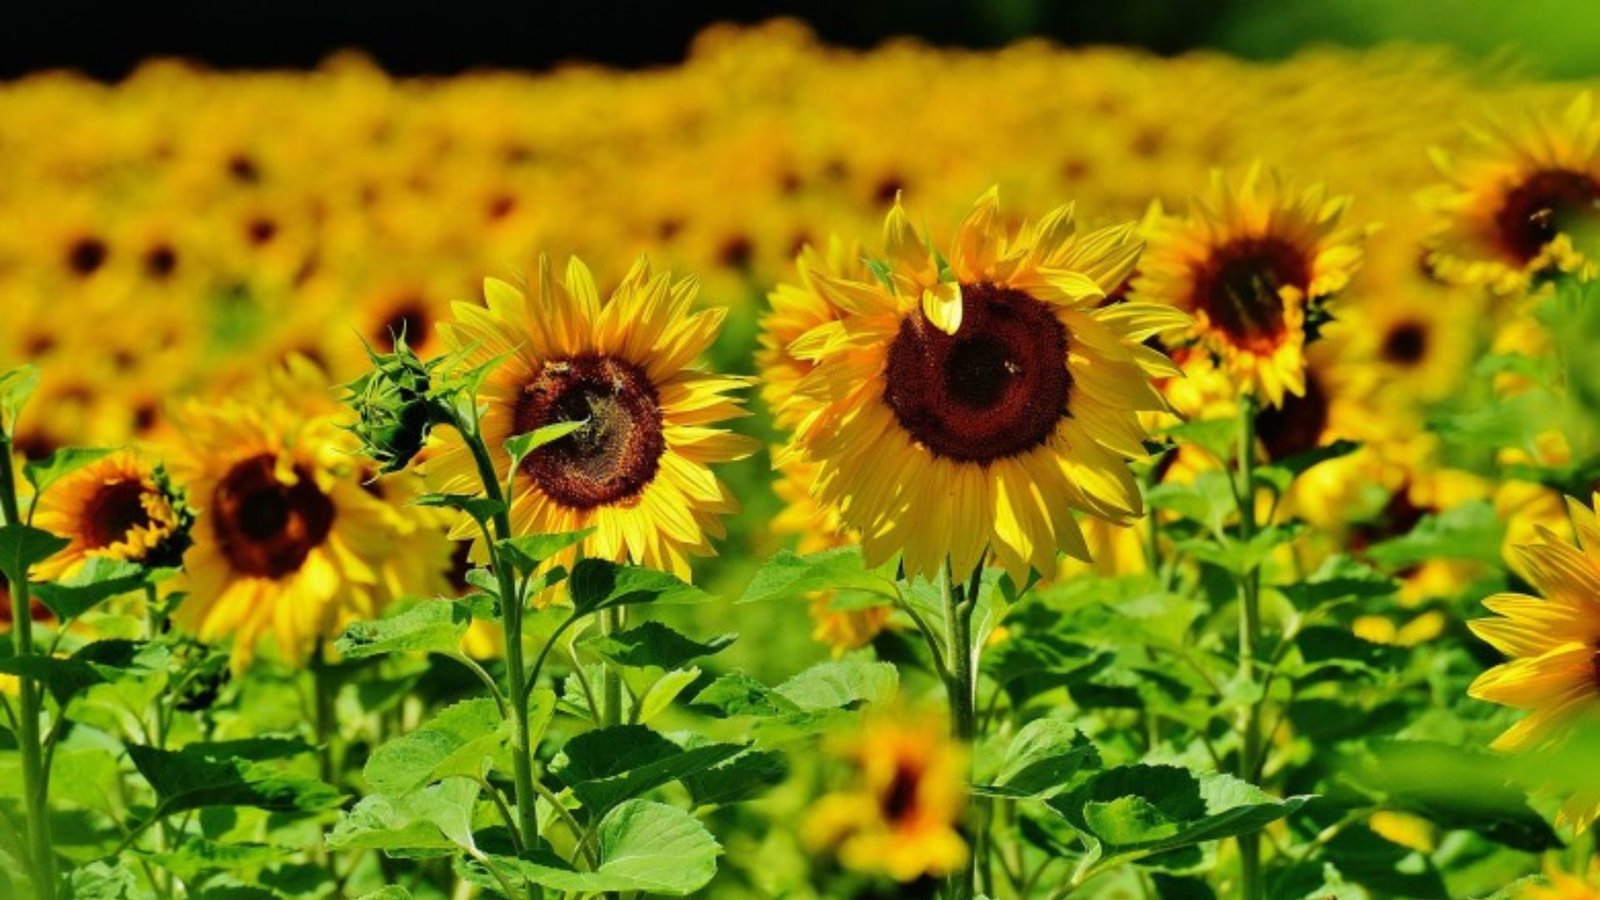 this image shows Sunflowers